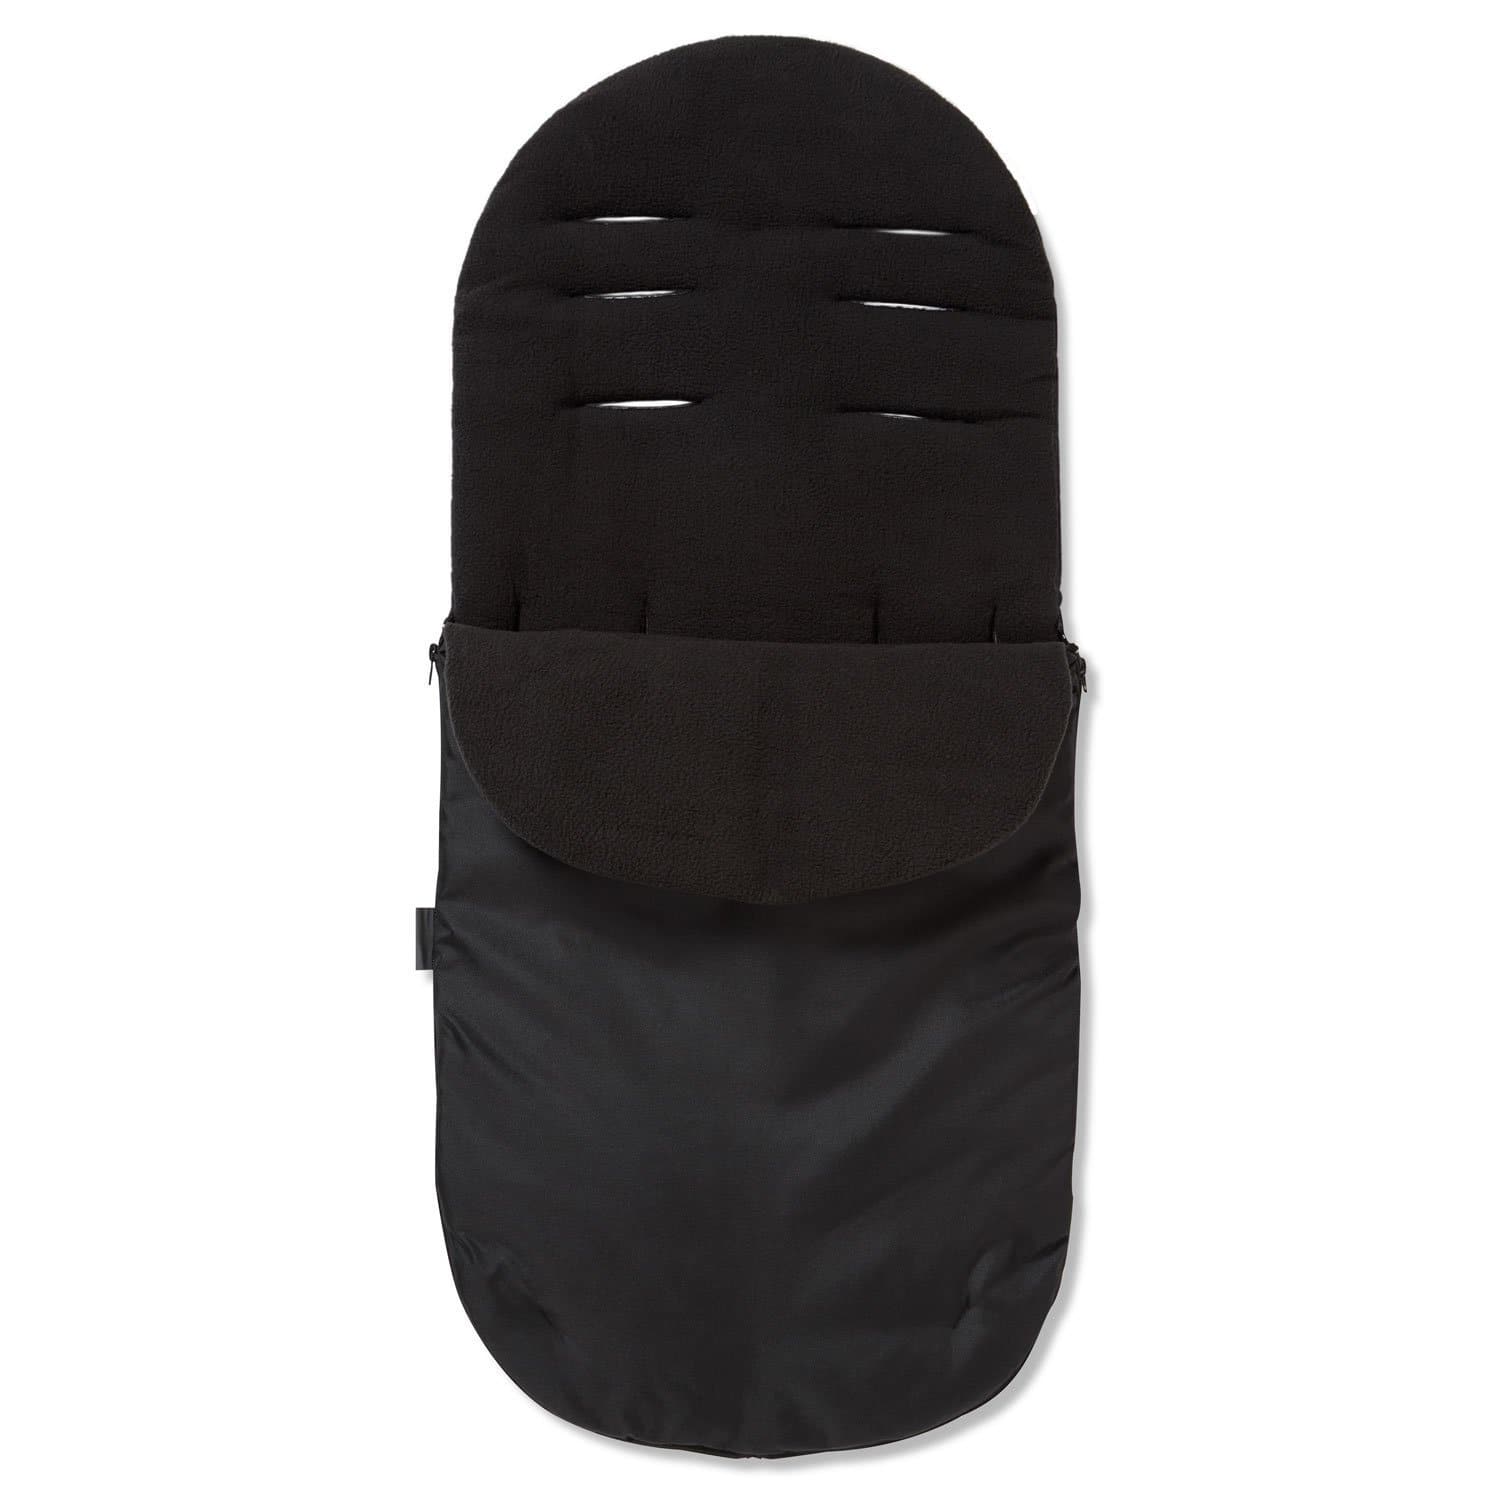 Footmuff / Cosy Toes Compatible with Kinderkraft - Black / Fits All Models | For Your Little One